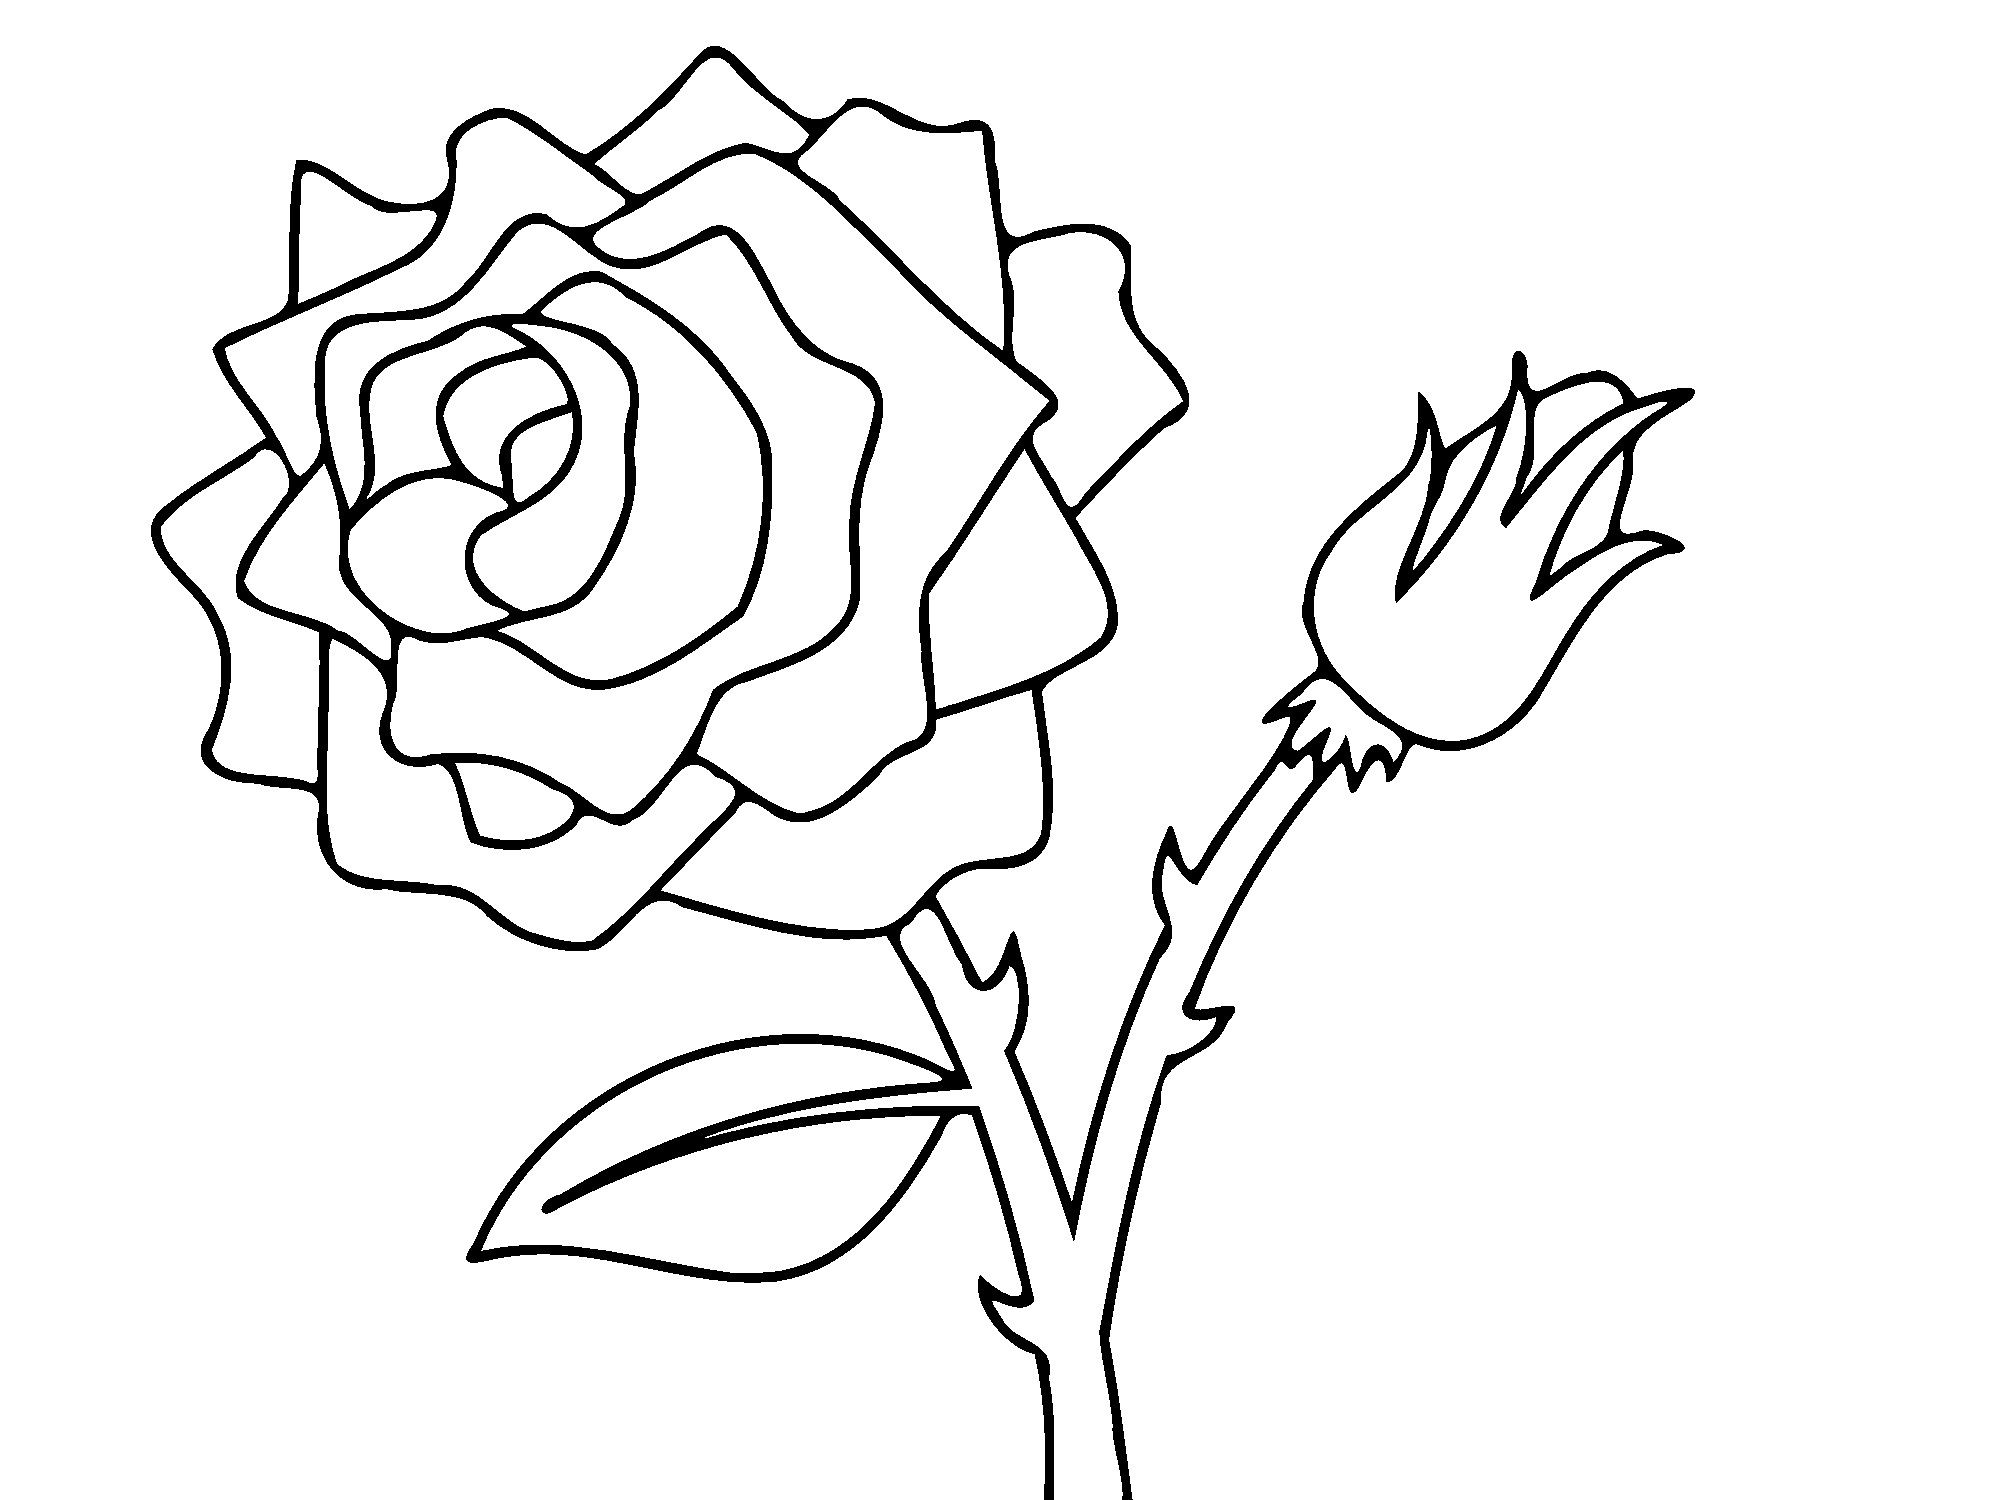 Coloring Pages Draw A Rose Coloring Pages For Kids - Coloring Page ...